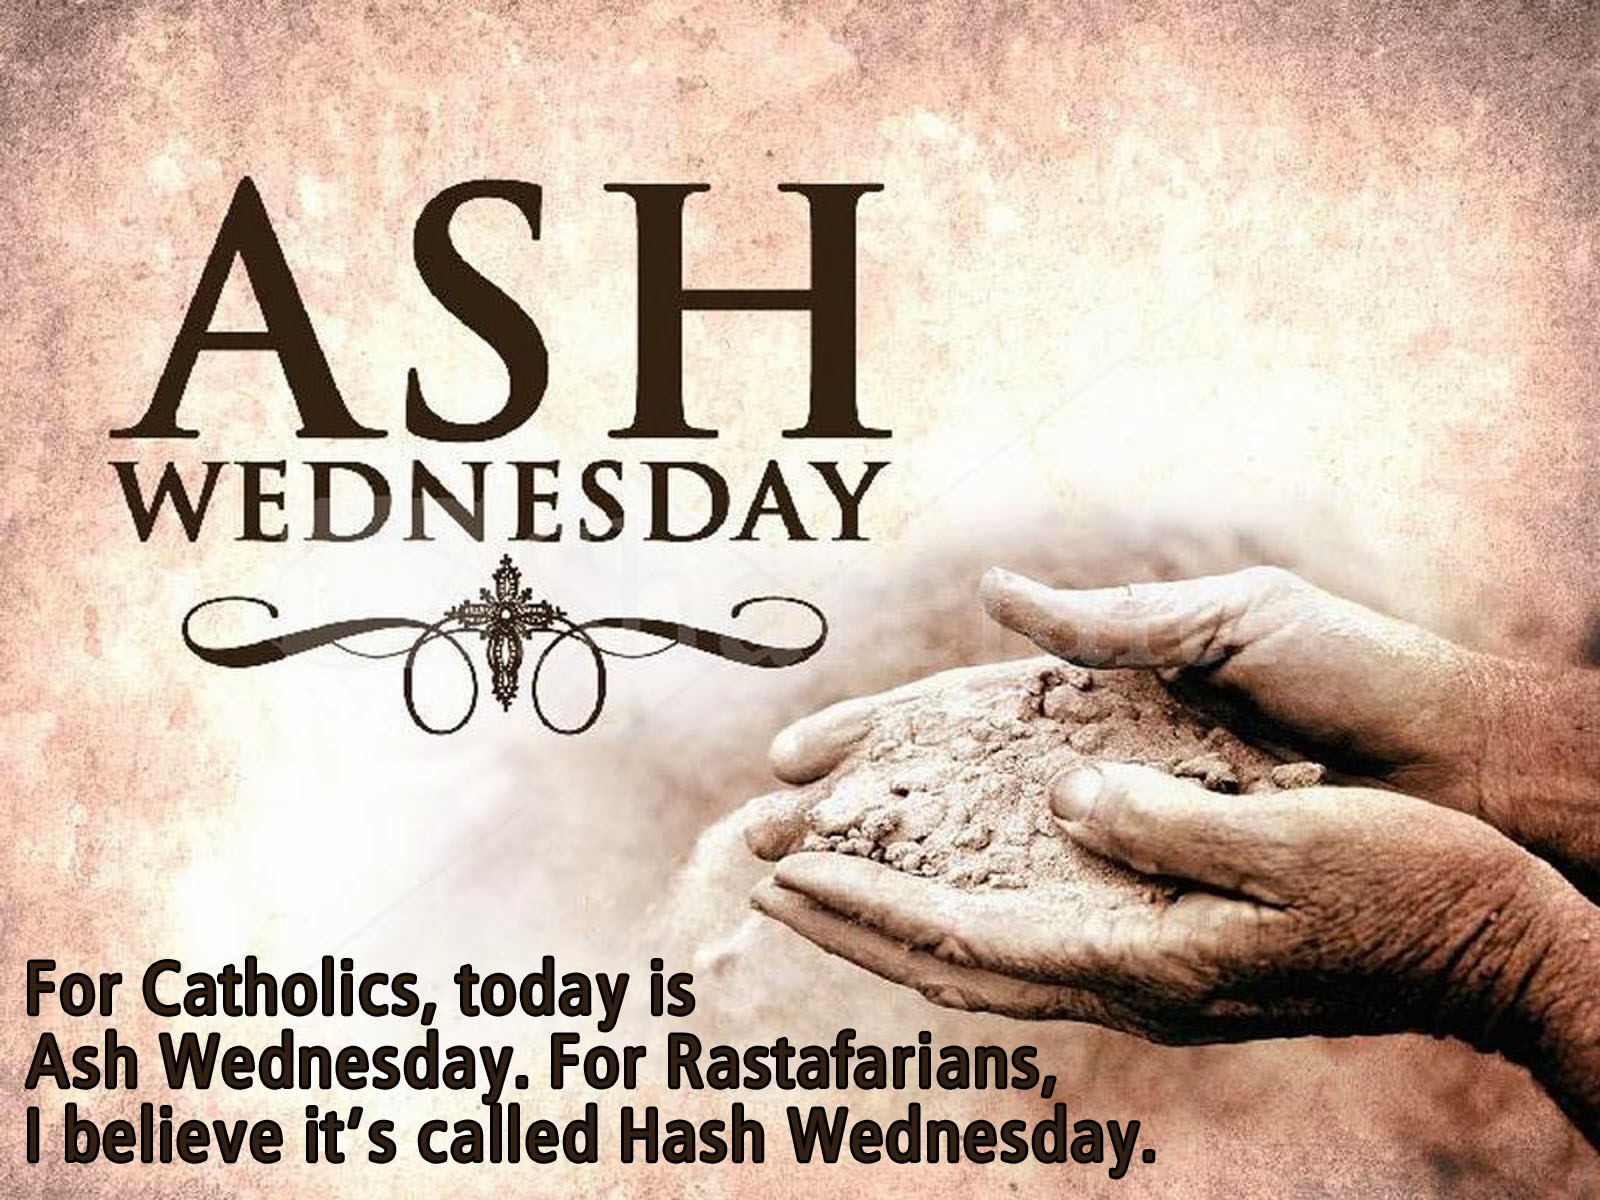 ash wednesday quotes catholic wishes quote sayings lent greetings quotesgram poetrysync